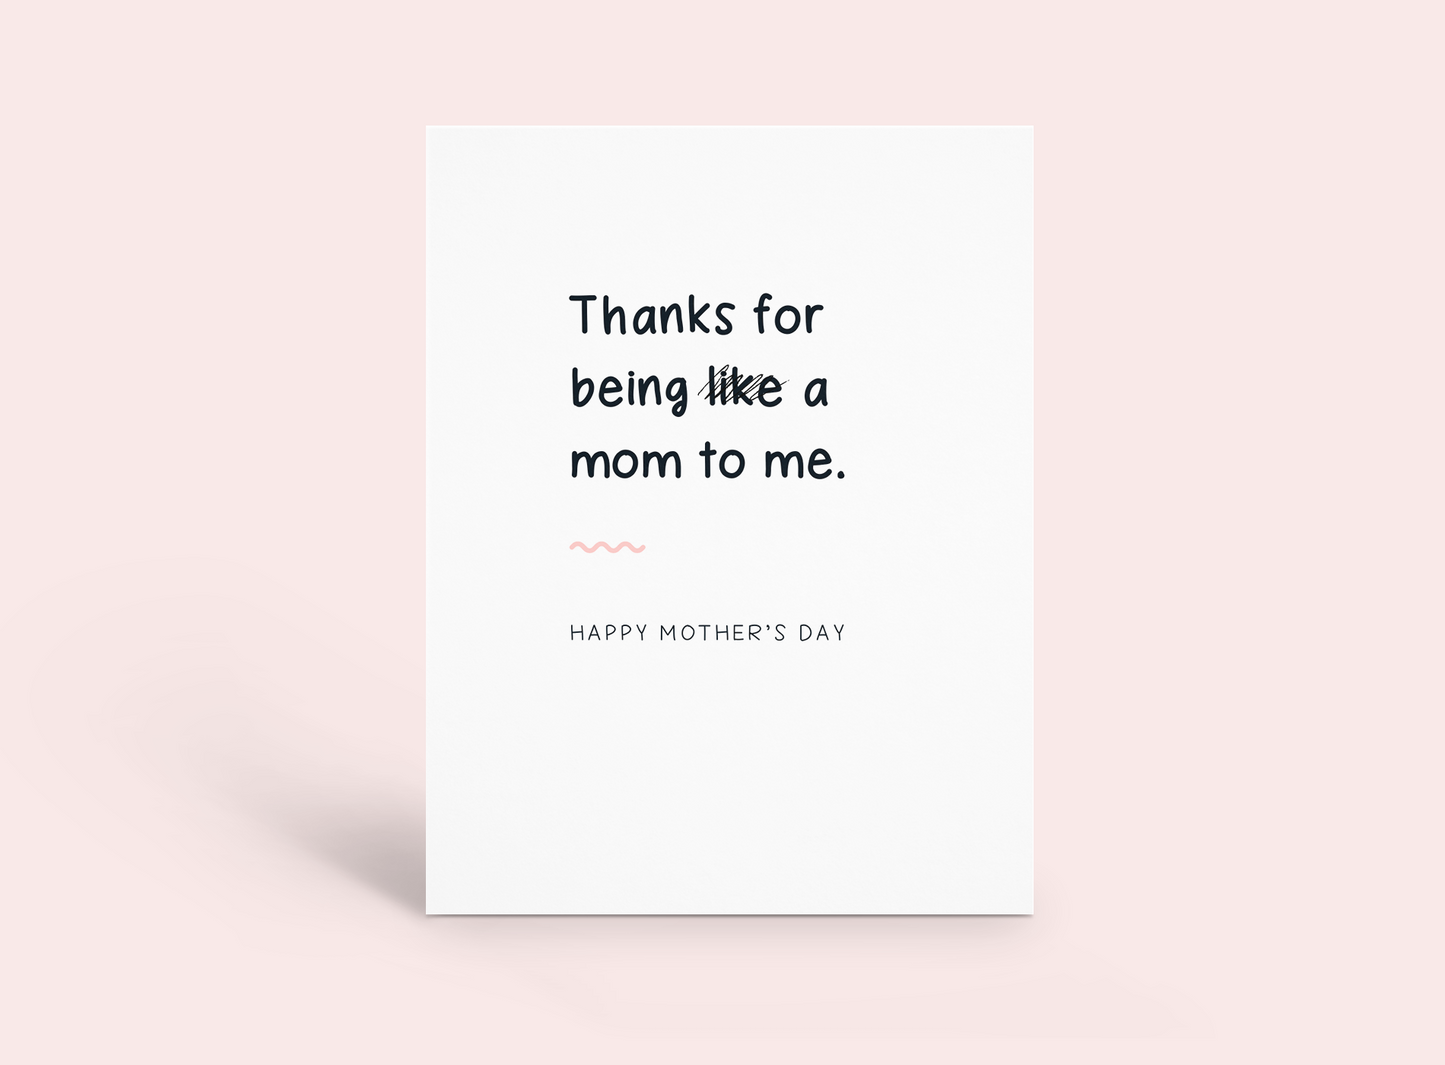 Mother's Day – Thanks for Being a Mom